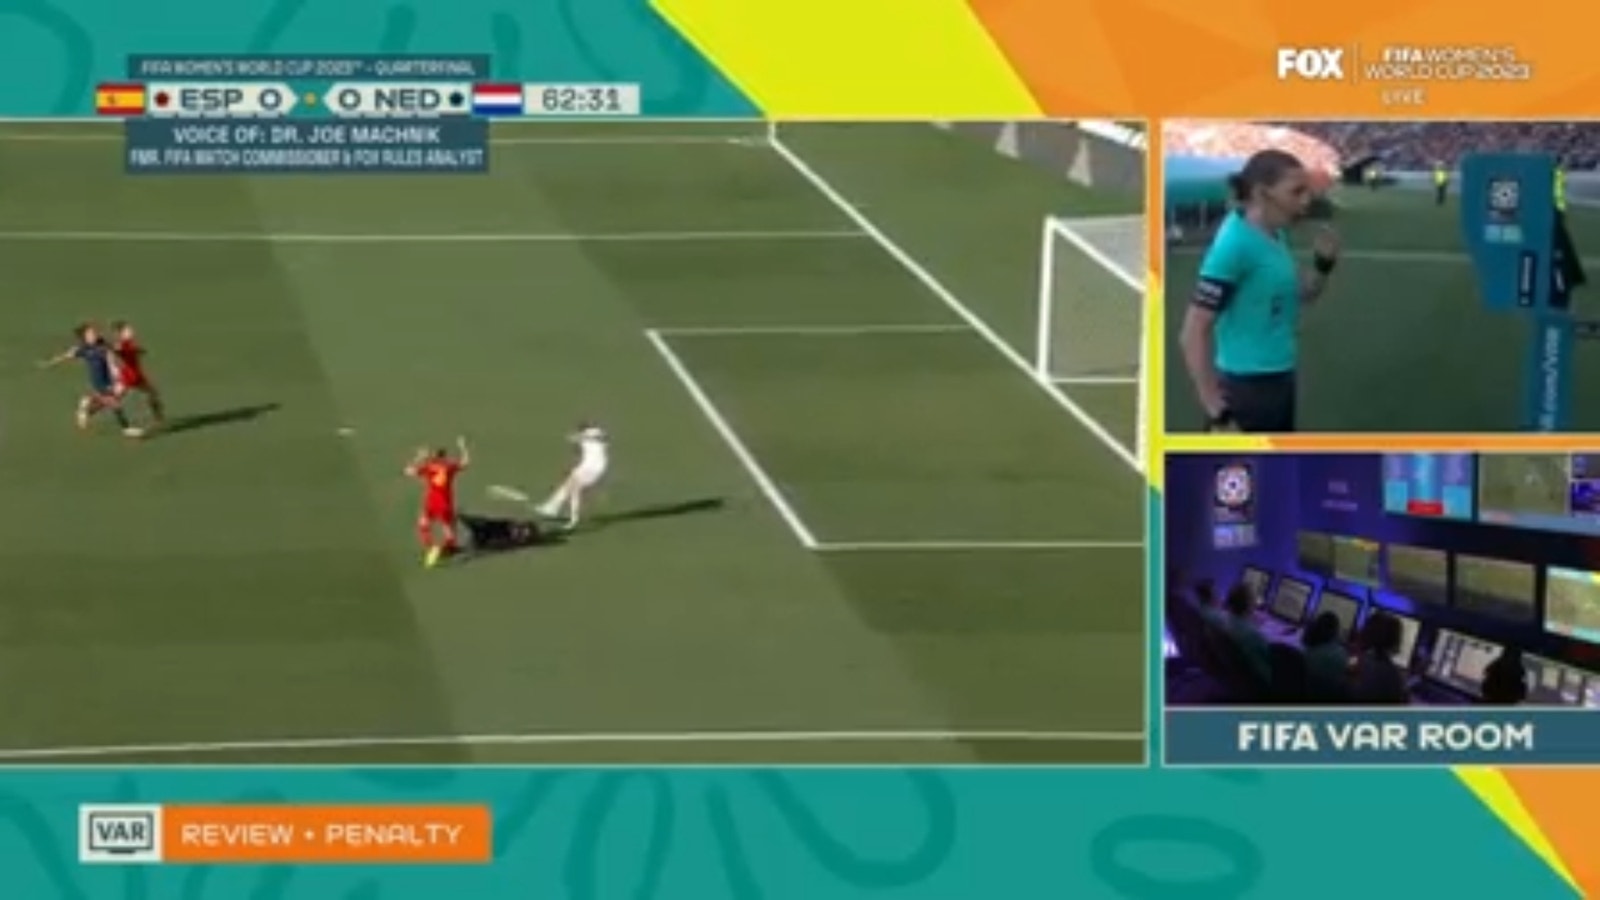 Spain's penalty vs. the Netherlands is overturned after VAR review